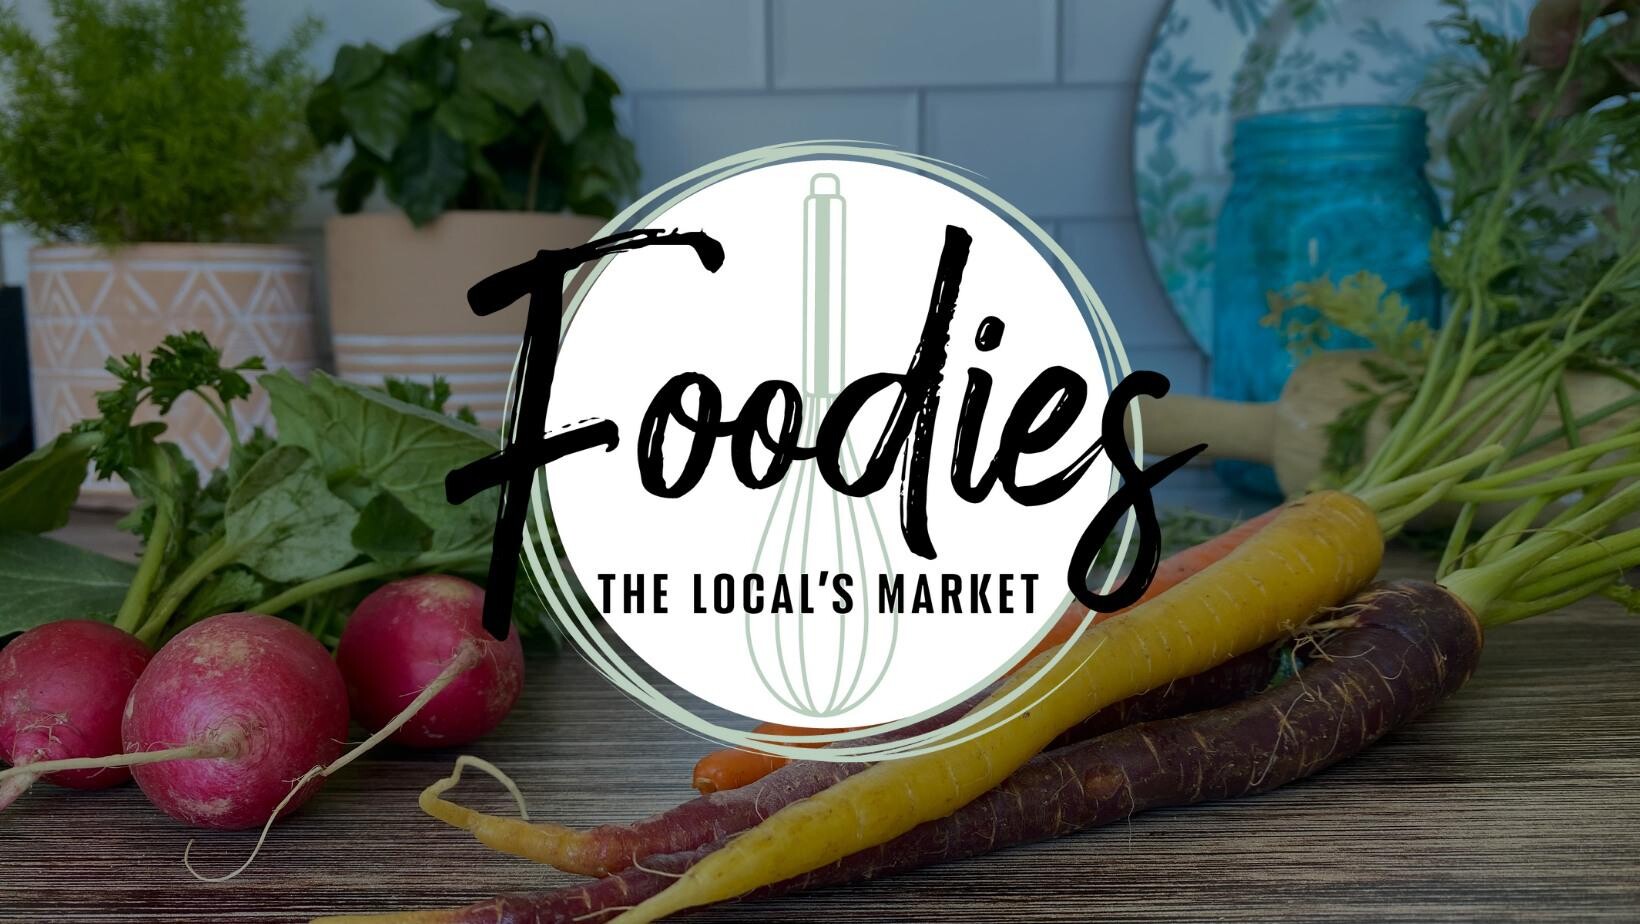 Foodies - The Local's Market